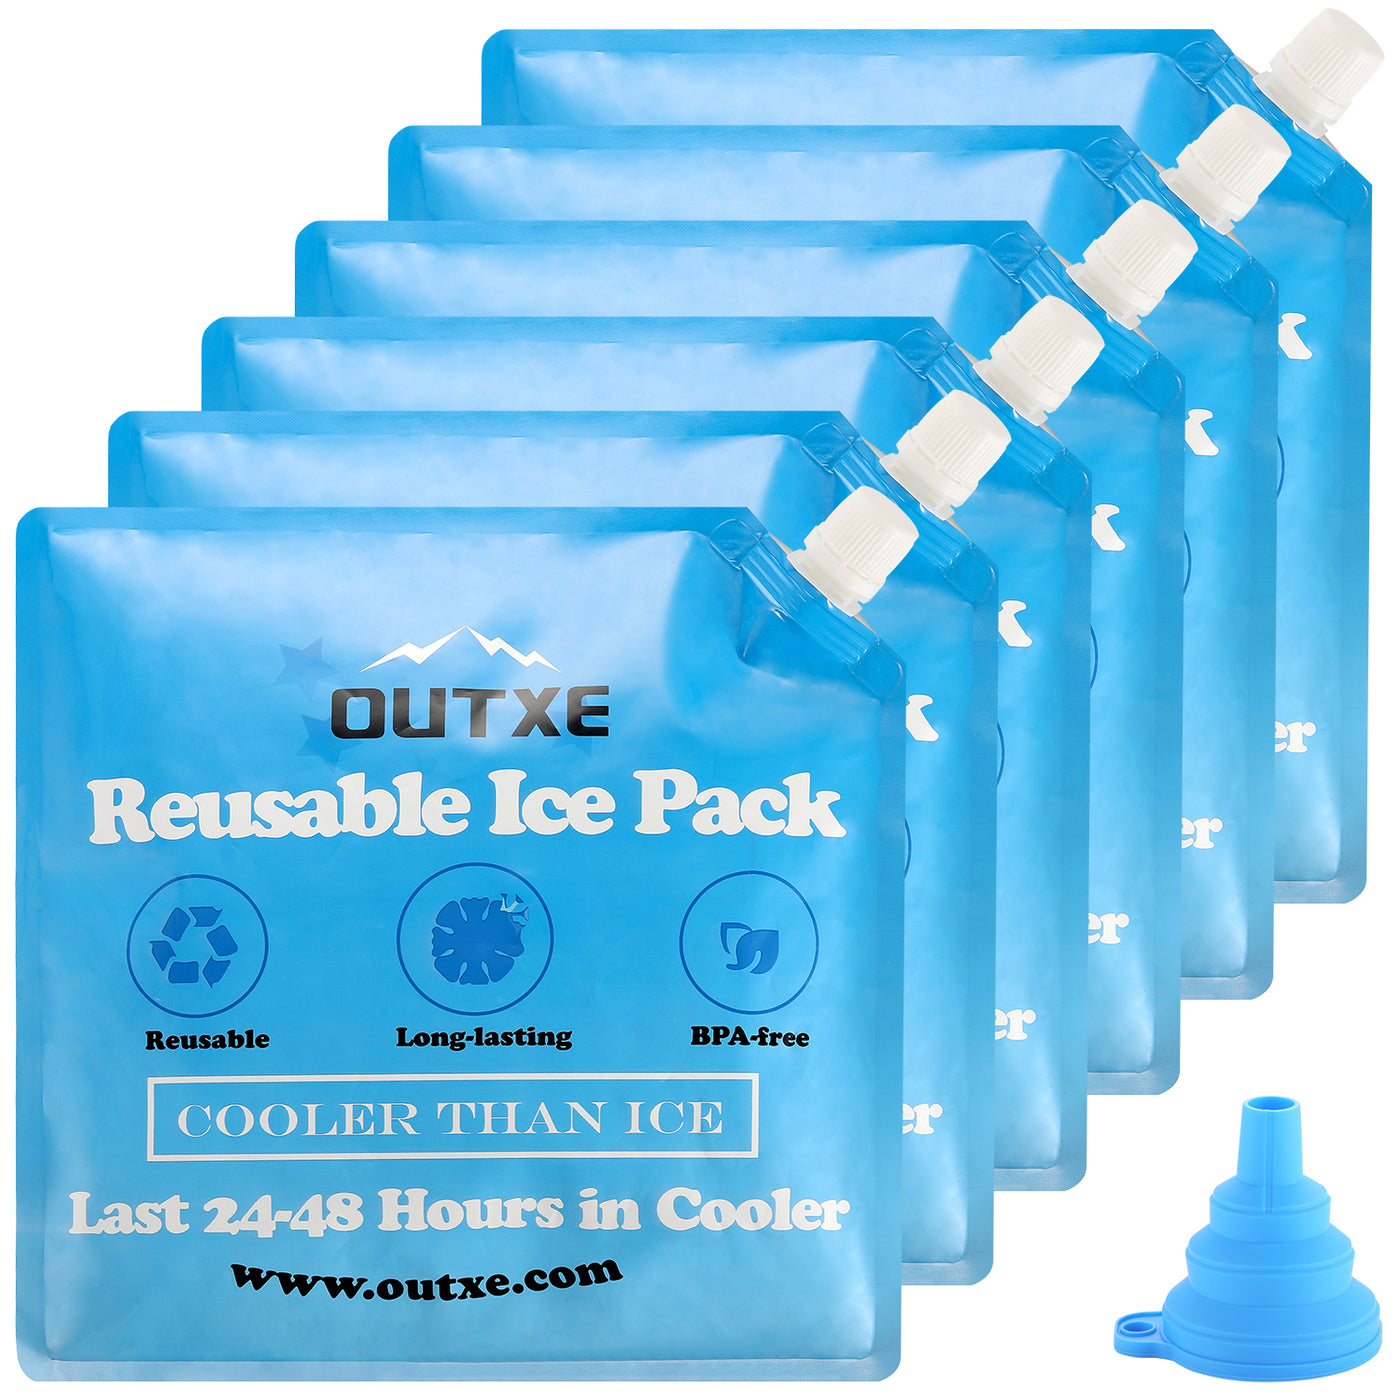 AIEVE Reusable Ice Packs for Cooler, 10 Pack Ice Indonesia